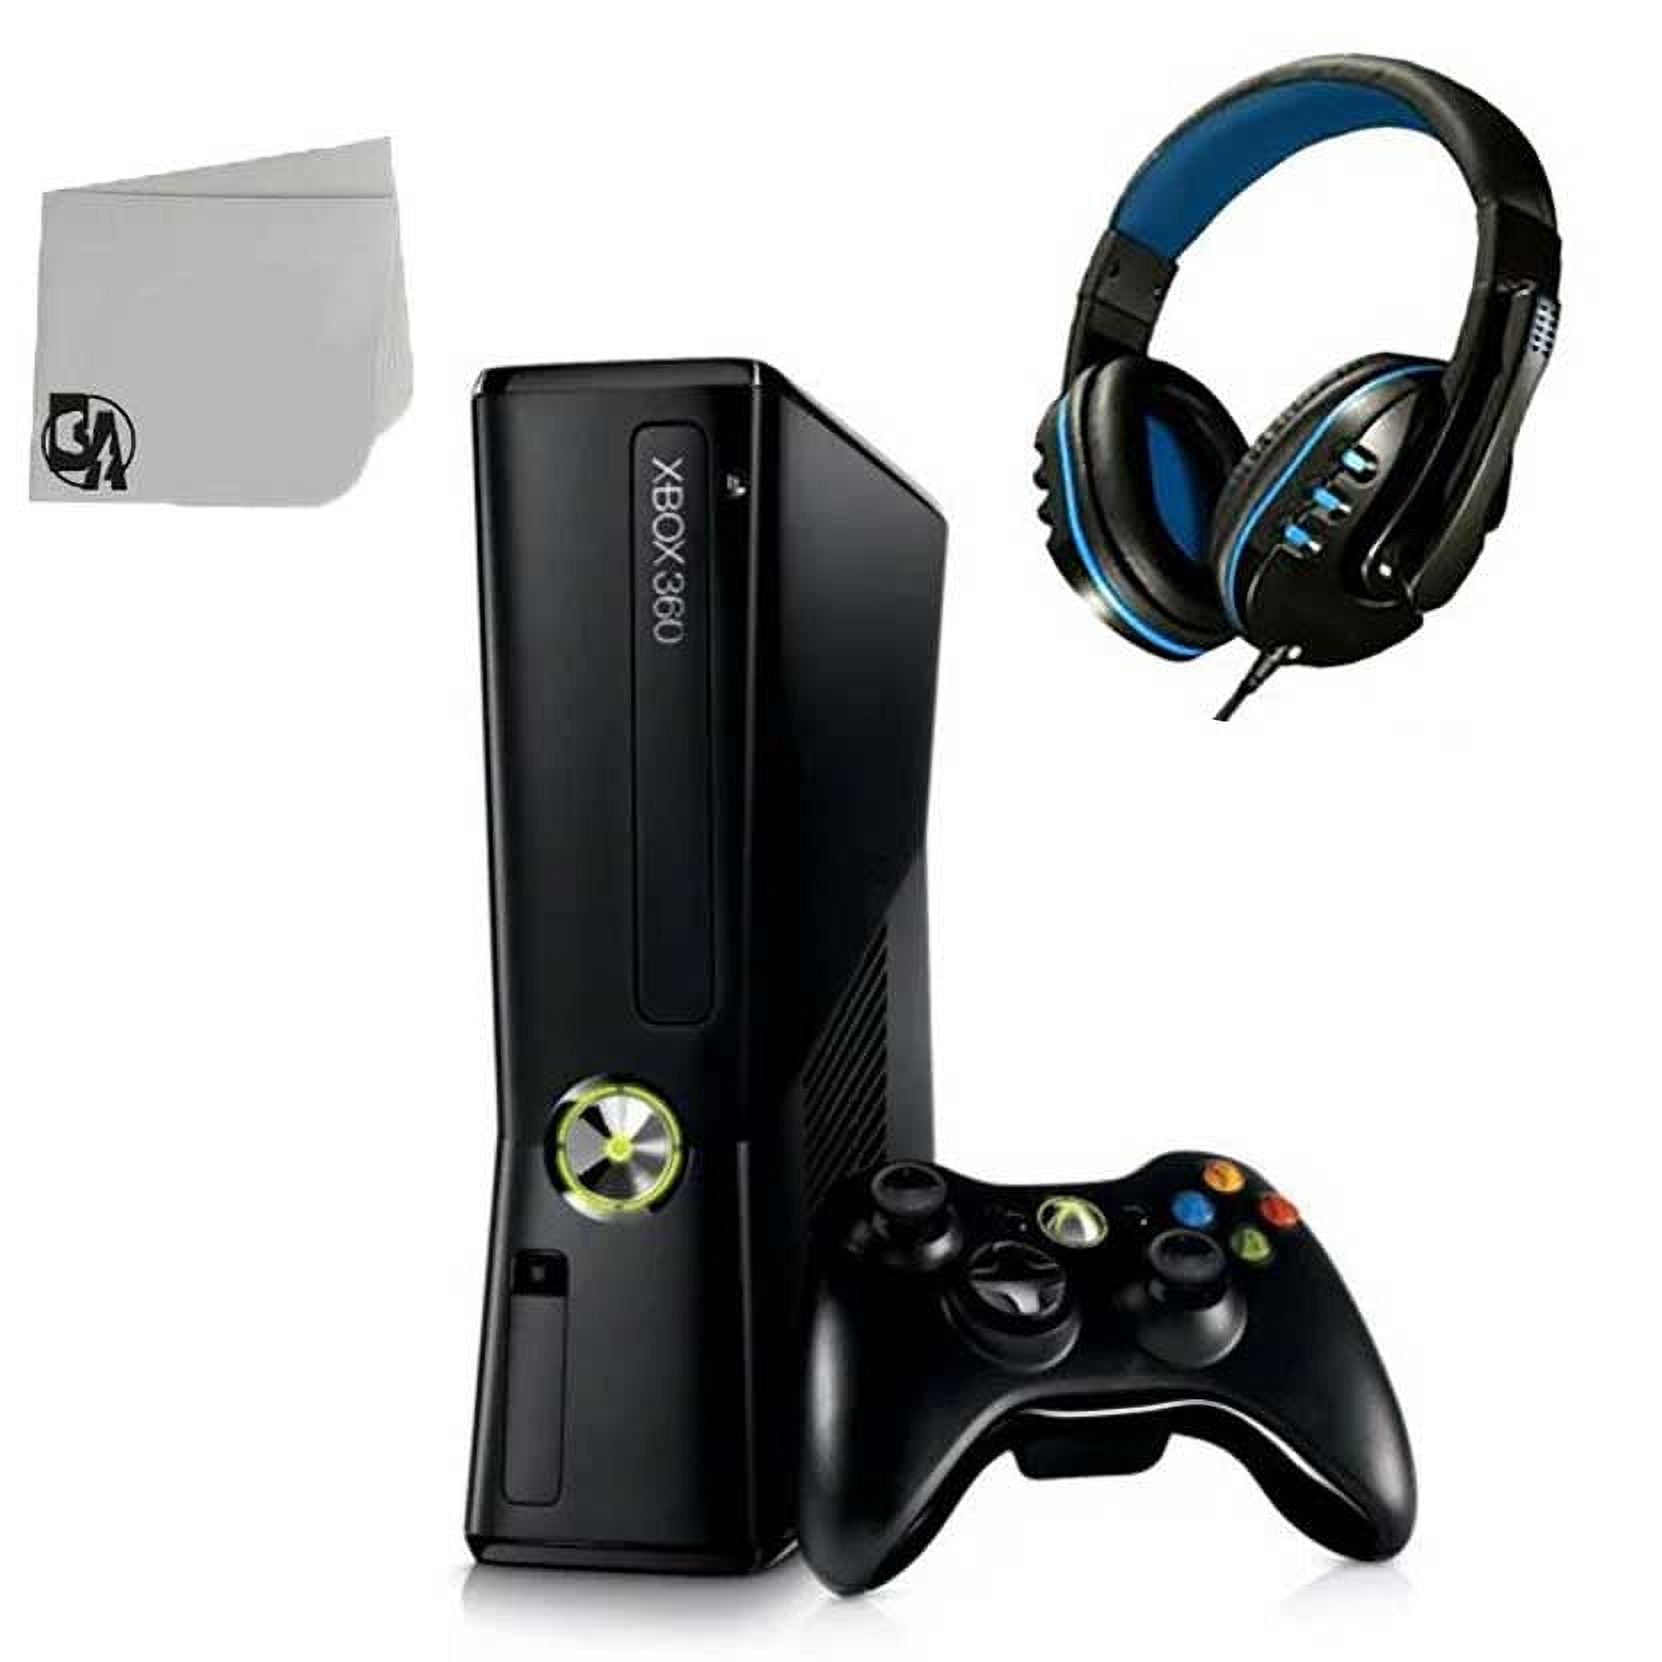 Pre-Owned Microsoft Xbox 360 250GB Video Game Console Black With BOLT  AXTION Headset Bundle